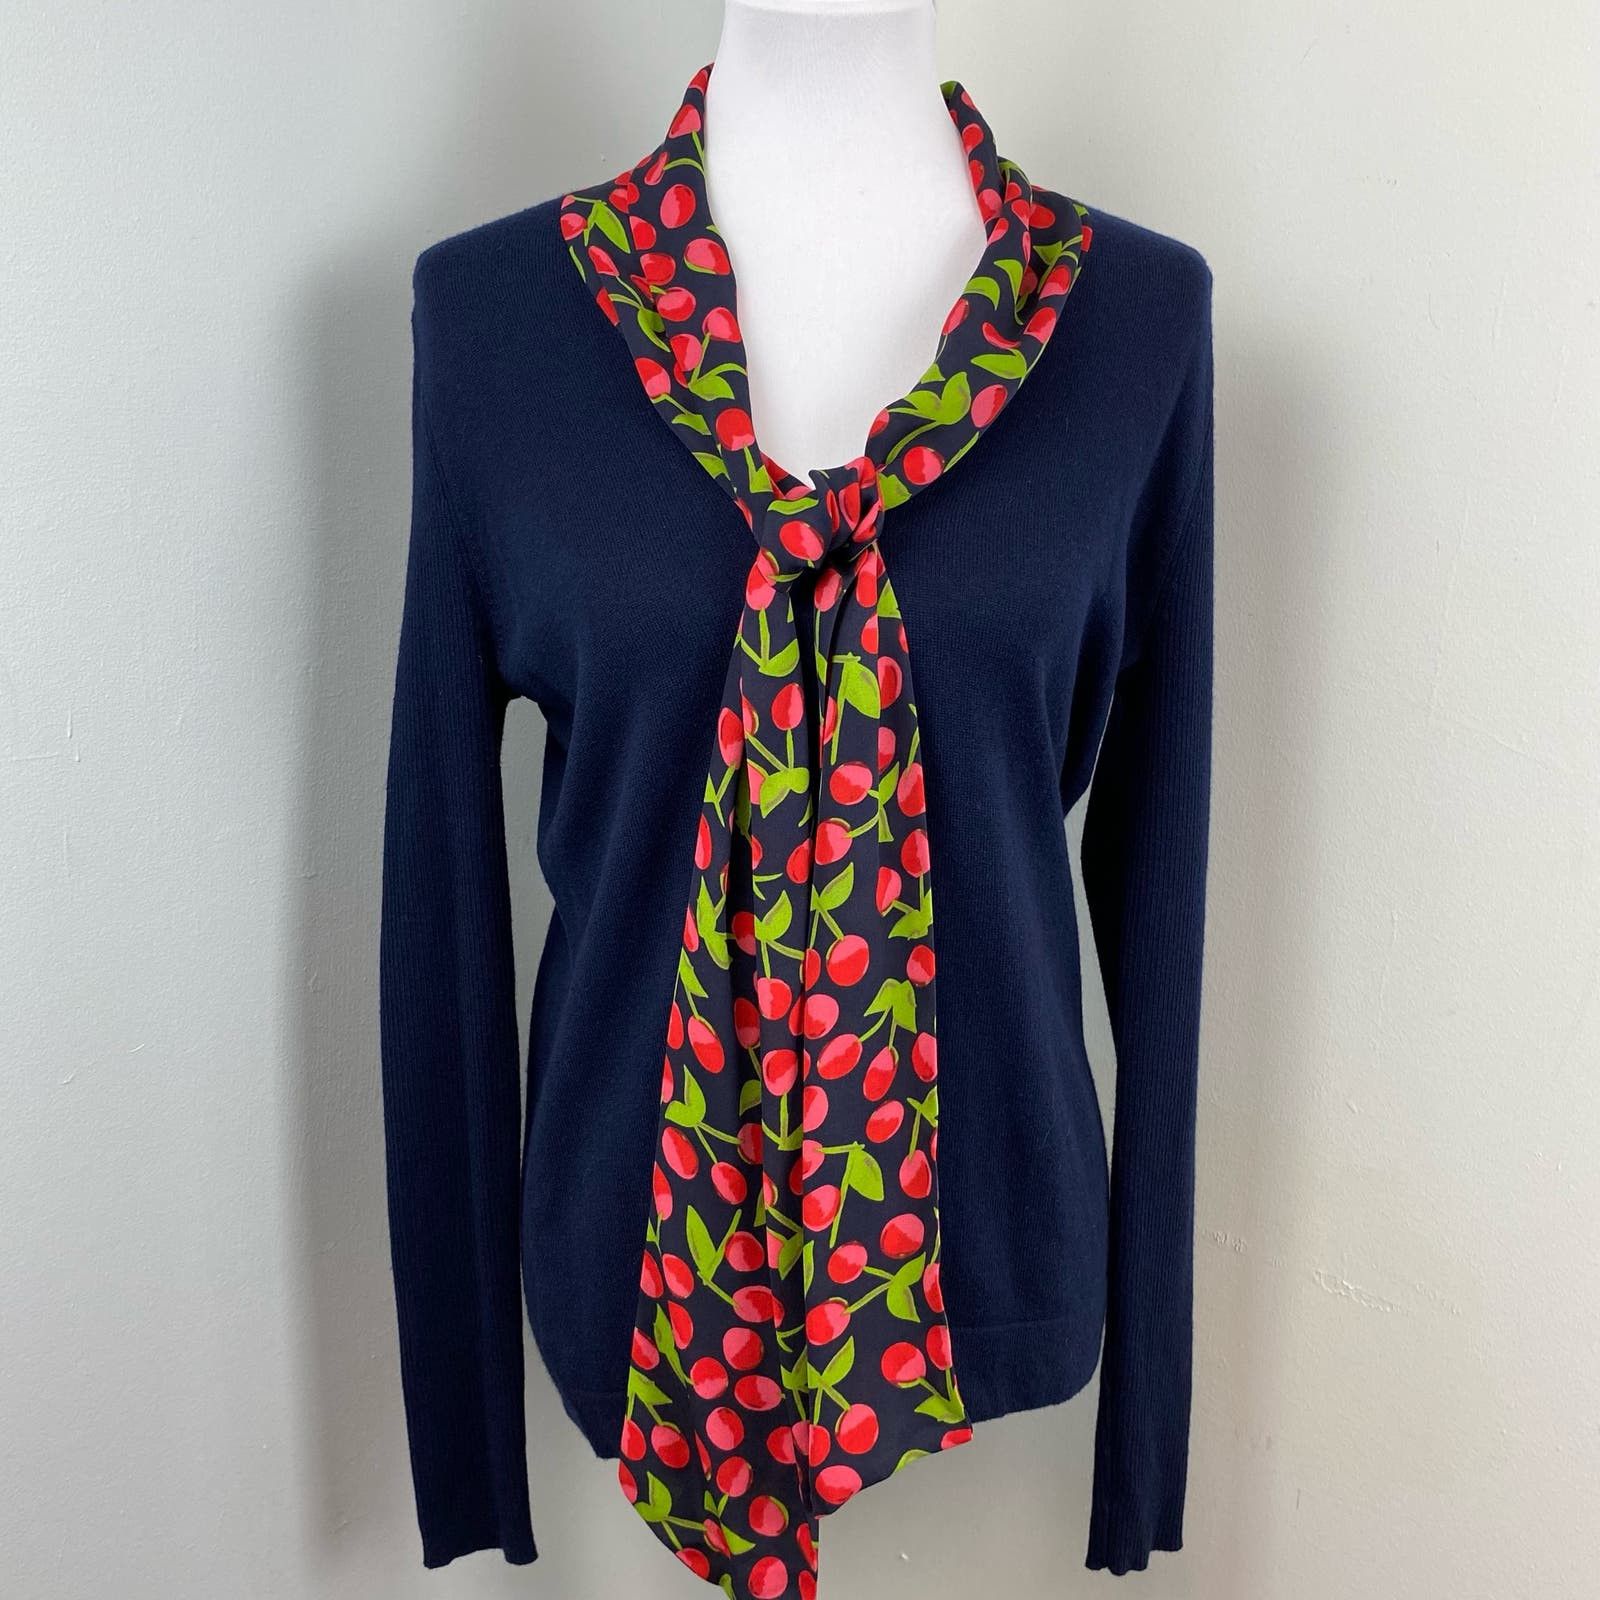 Tory Burch Tory Burch Navy Cashmere Silk Cherry Print Neck Tie Sweater Size L / US 10 / IT 46 - 1 Preview